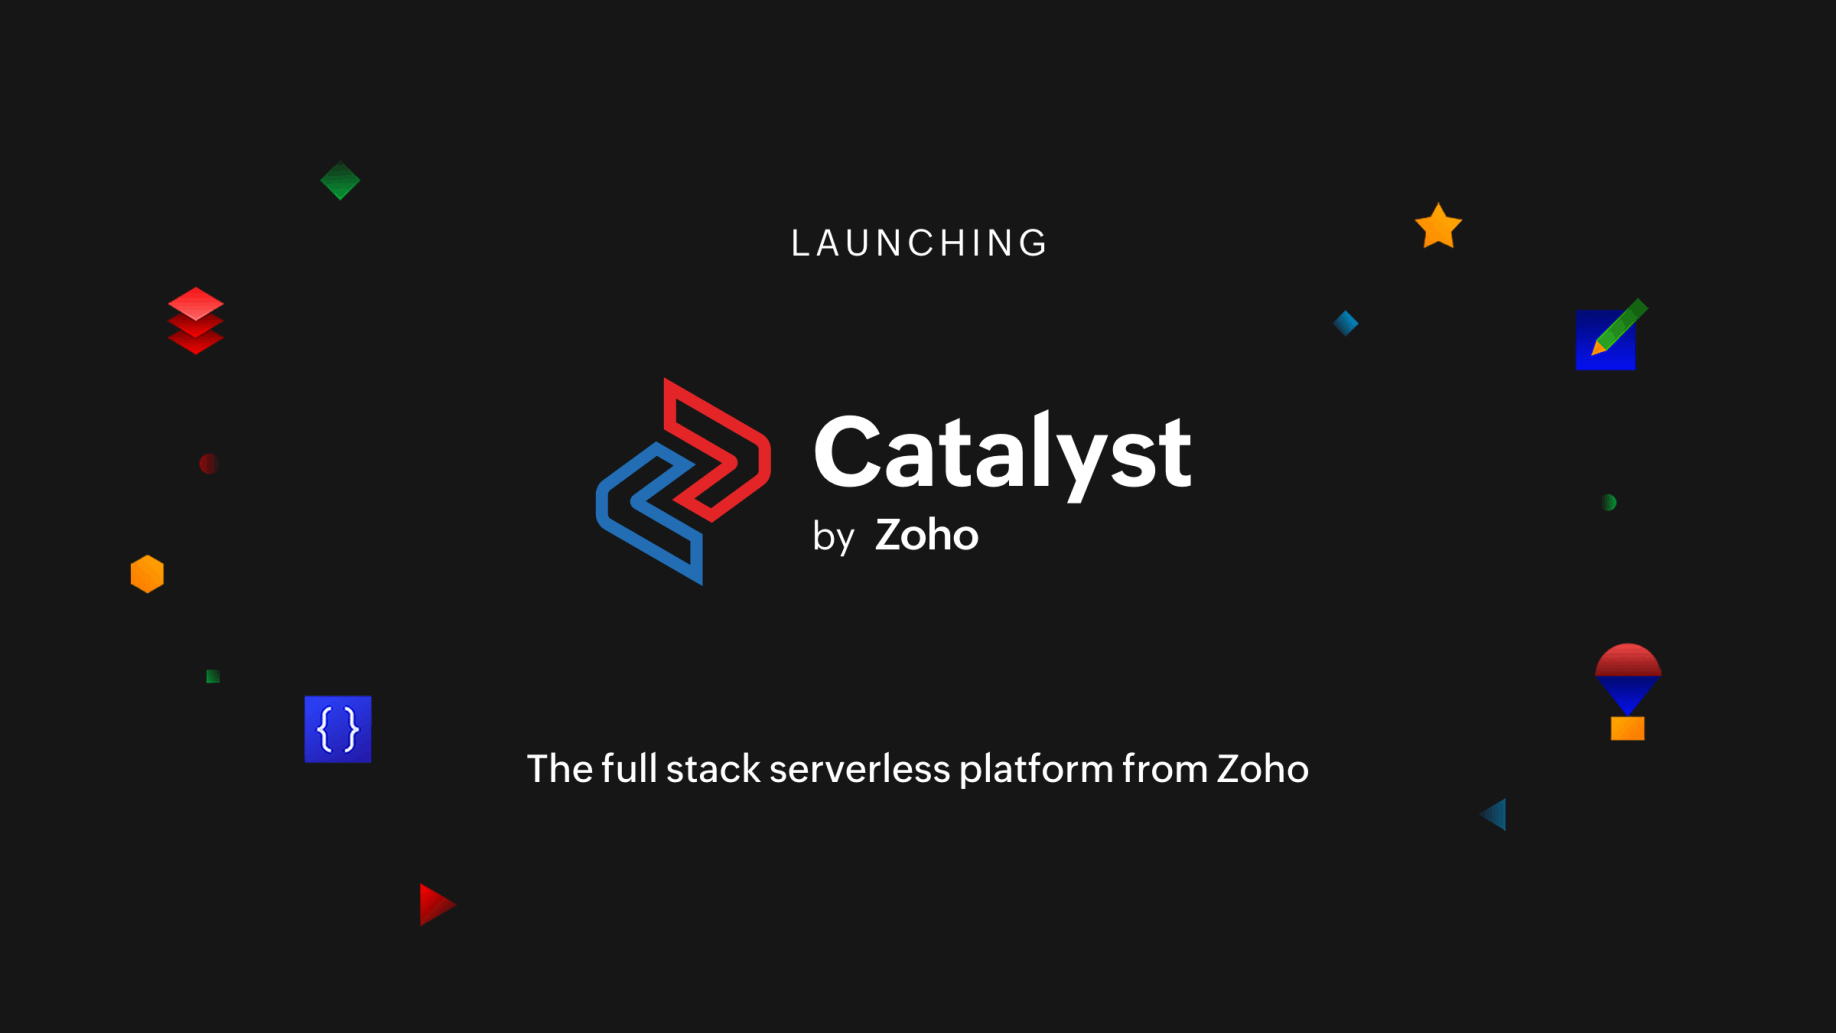 Catalyst launches today!